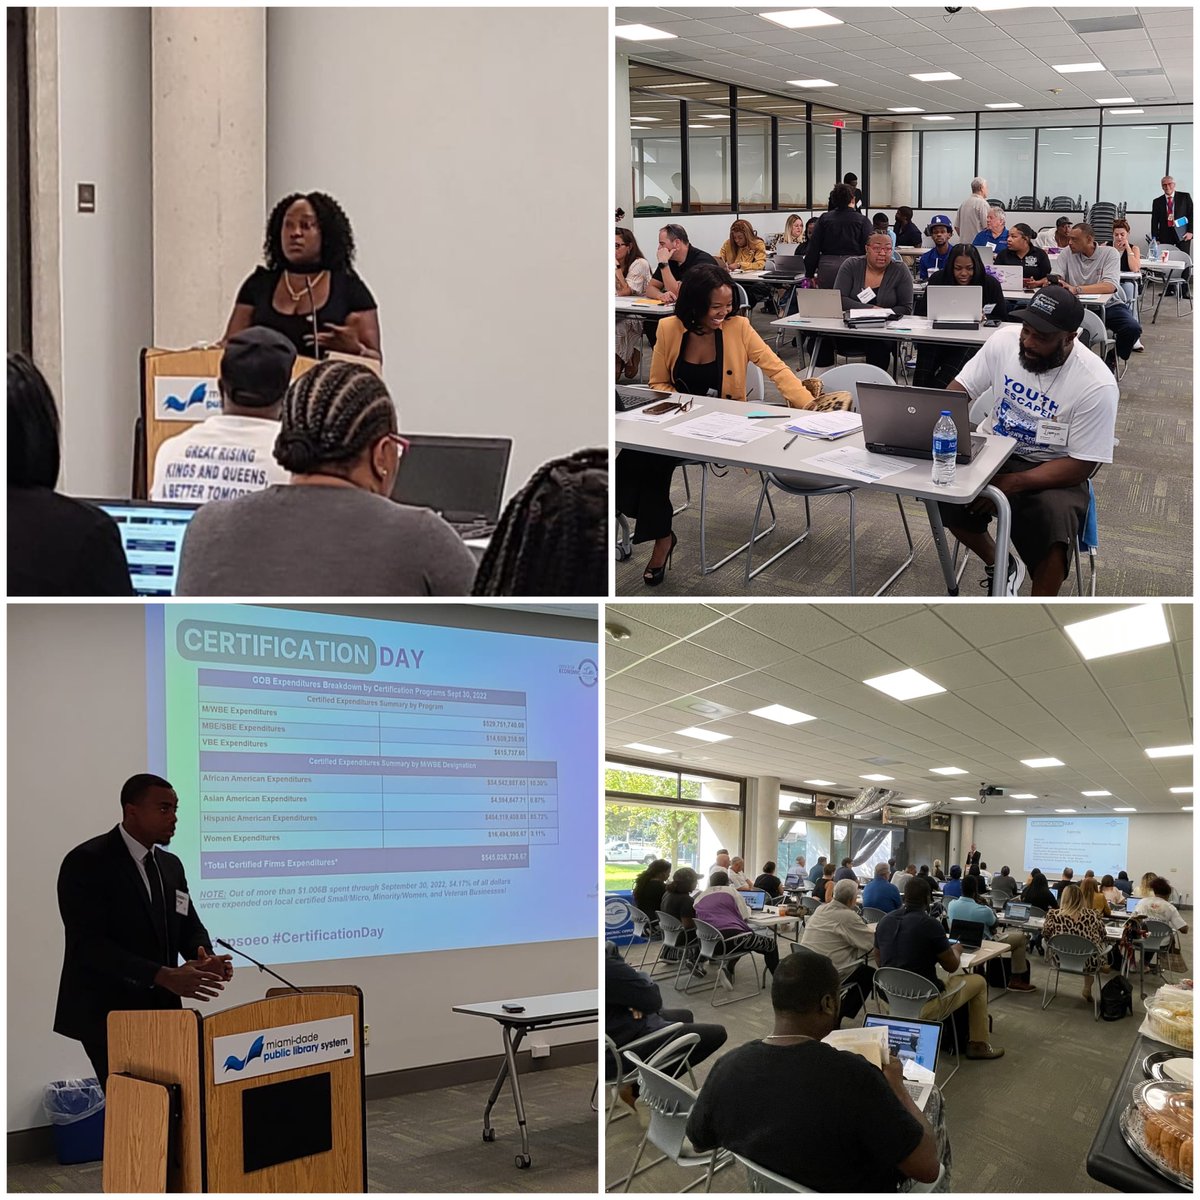 Thank you @MDPLS for hosting the Certification and Outreach team for our biggest #CertificationDay yet!
We are excited to connect with all the local vendors who came by to get a step closer to doing business with @MDCPS. #OpportunityIsKnocking #SouthFLSmallBiz #MWBE #SBE